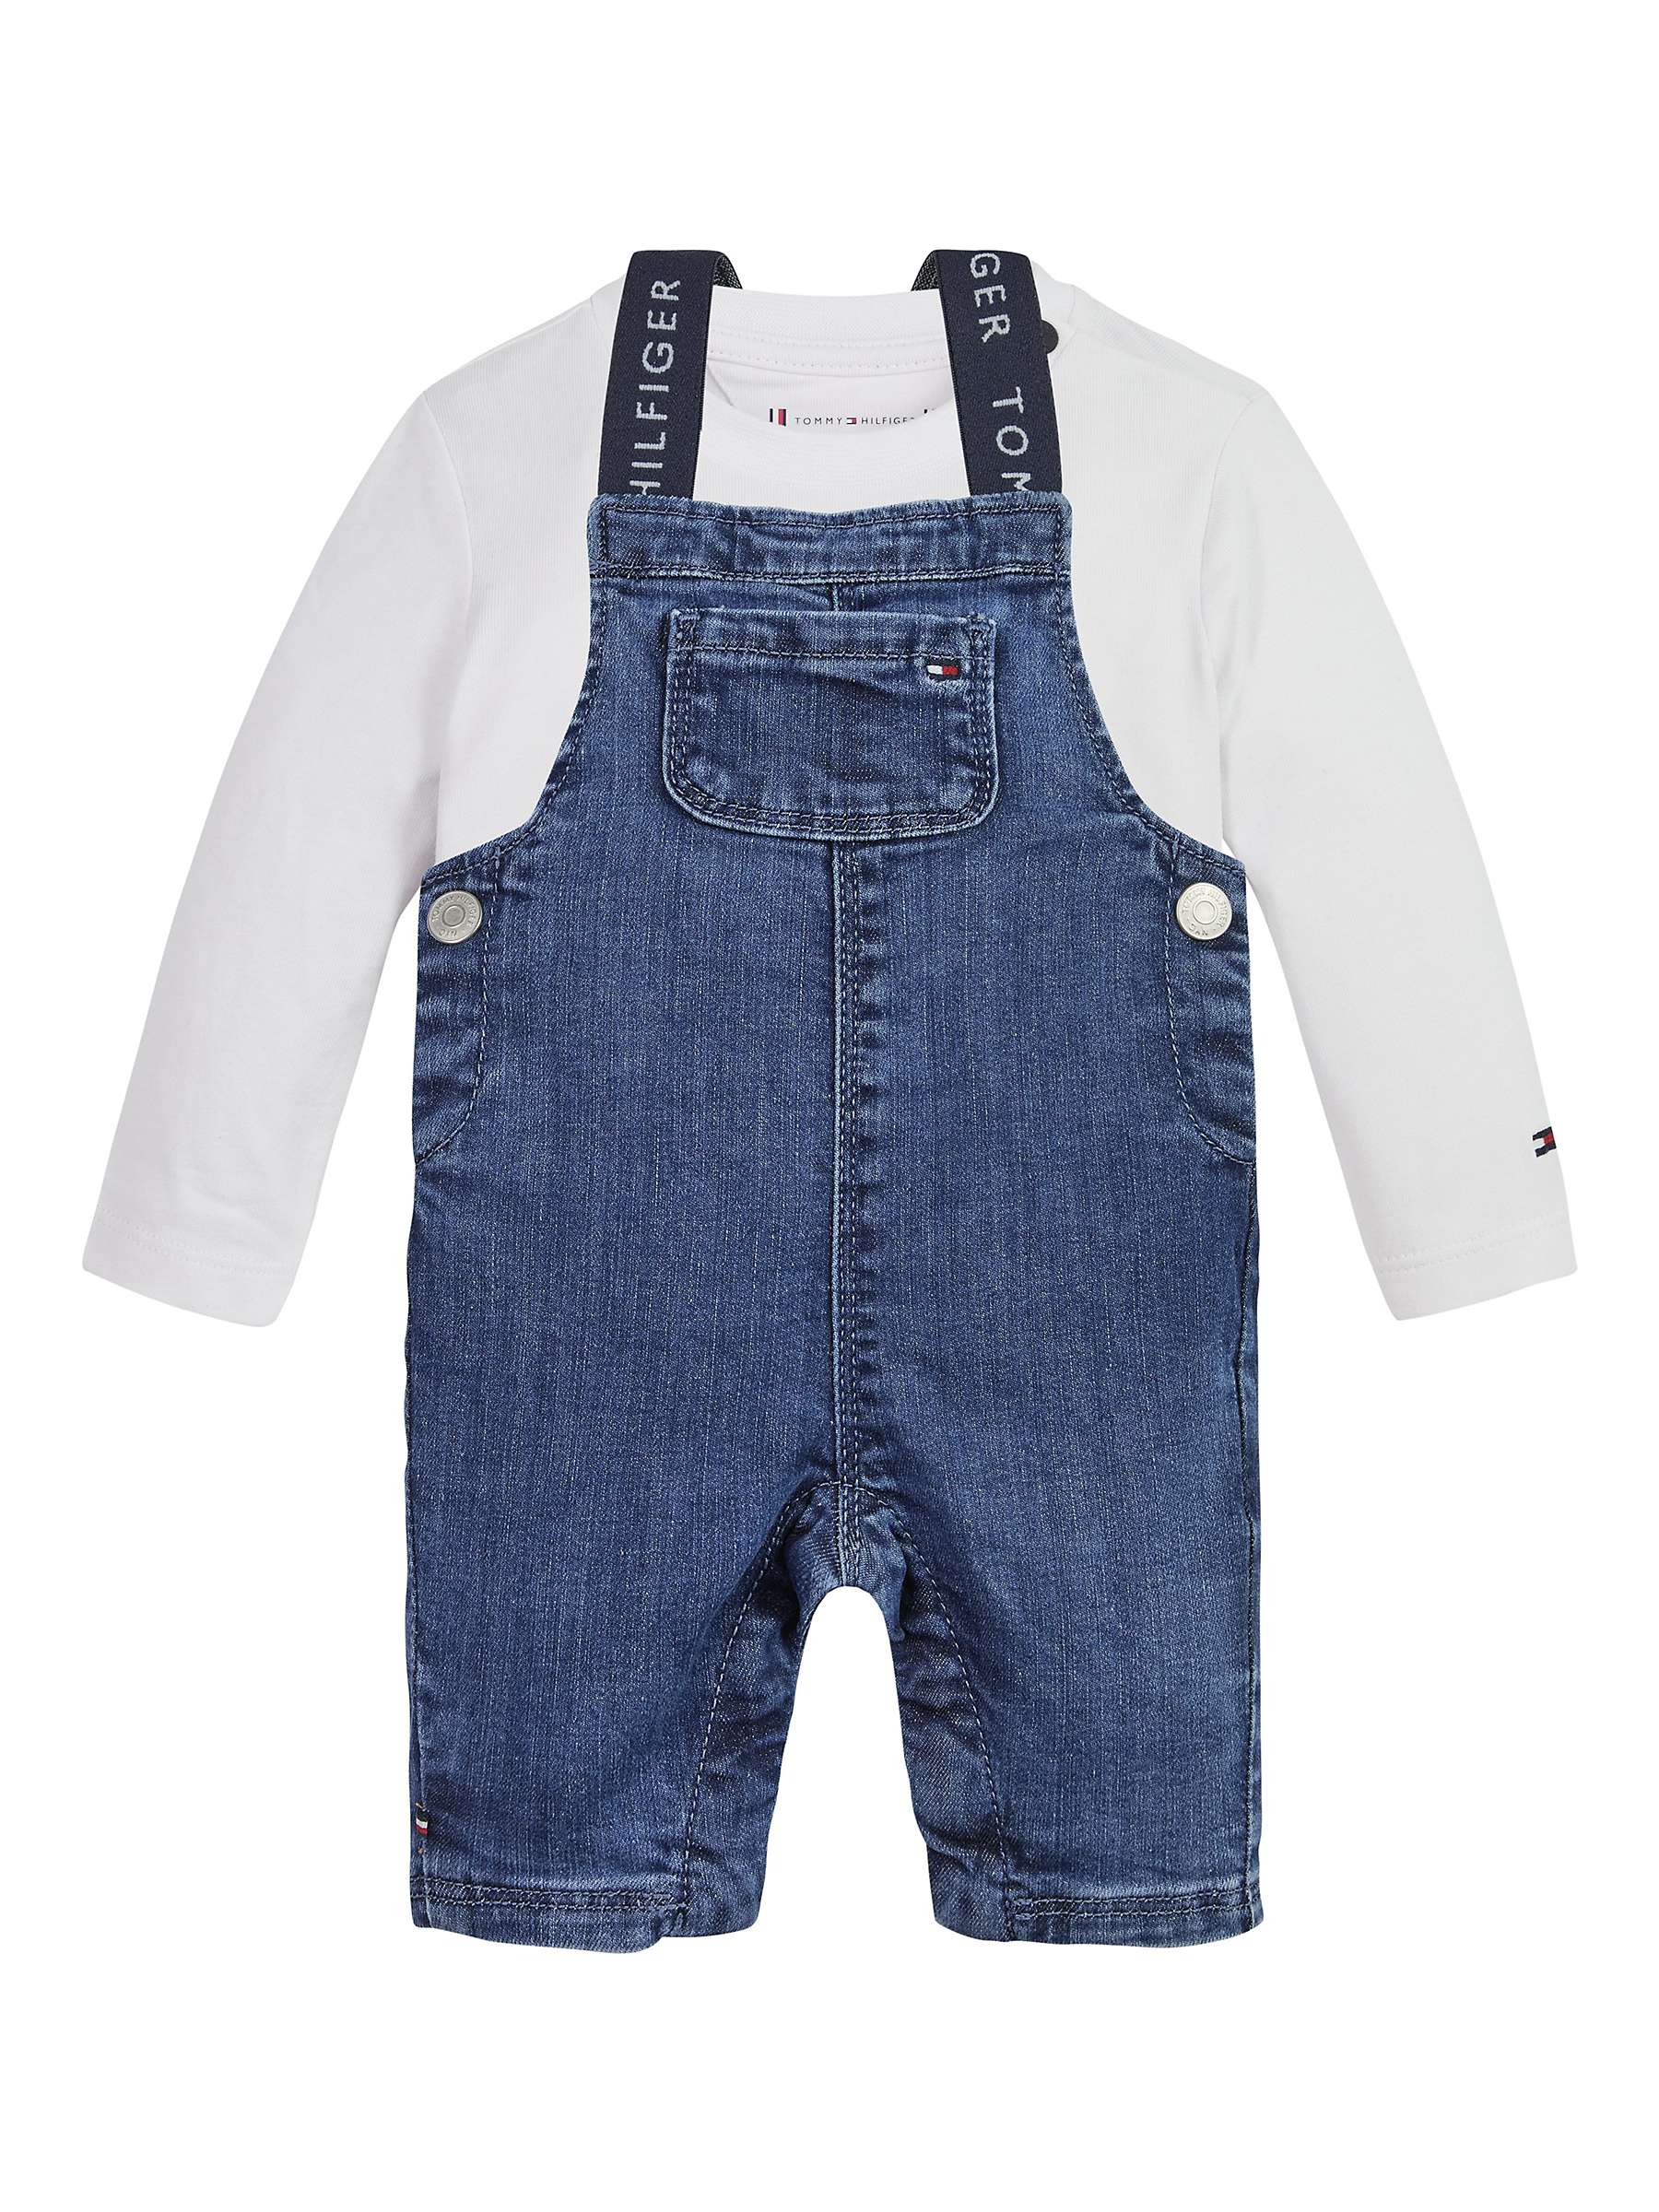 Buy Tommy Hilfiger Baby Dungaree and Top Set, White Online at johnlewis.com